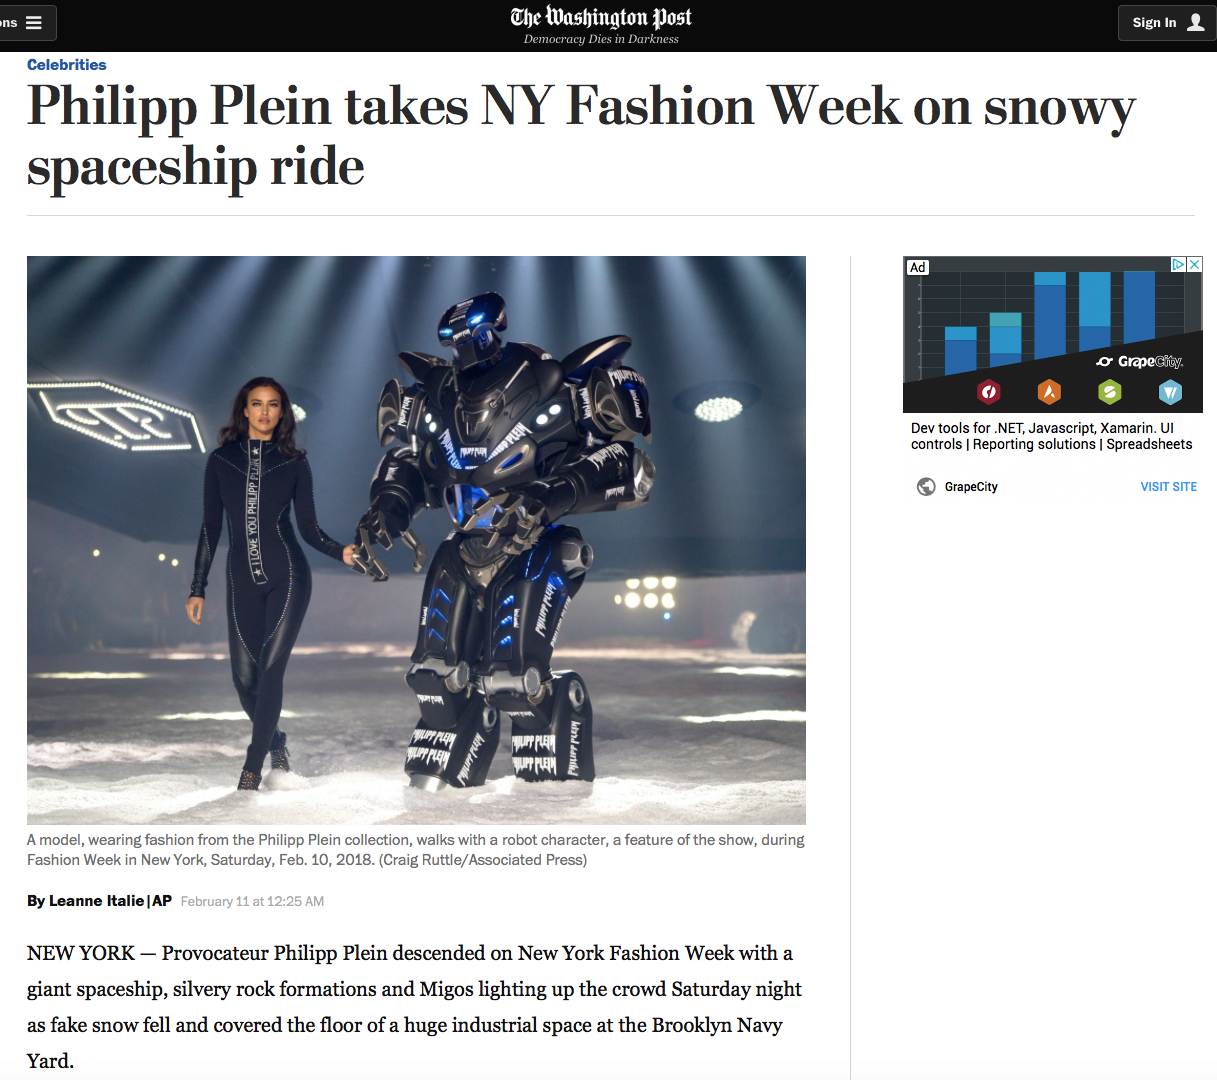 Titan the Robot appears in the Washington Post after his appearance at New York Fashion Week.